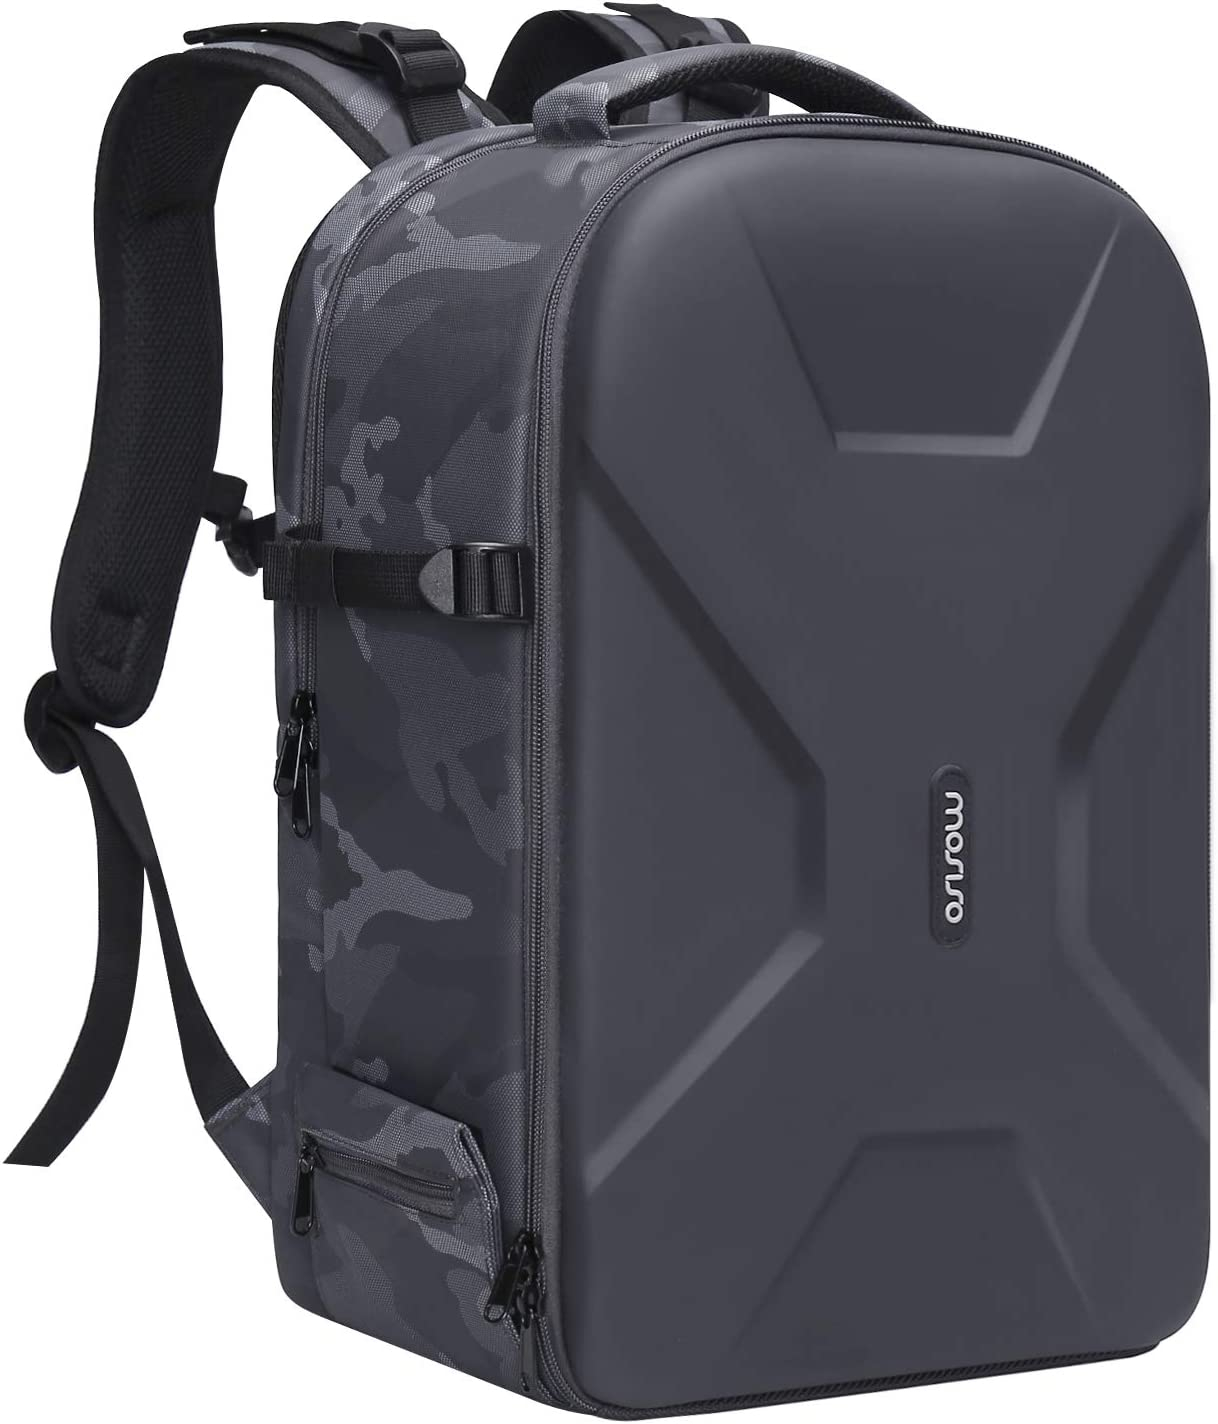 MOSISO Camera Backpack,DSLR/SLR/Mirrorless Photography Camera Bag Camouflage Waterproof Hardshell Case With Tripod Holder&Laptop